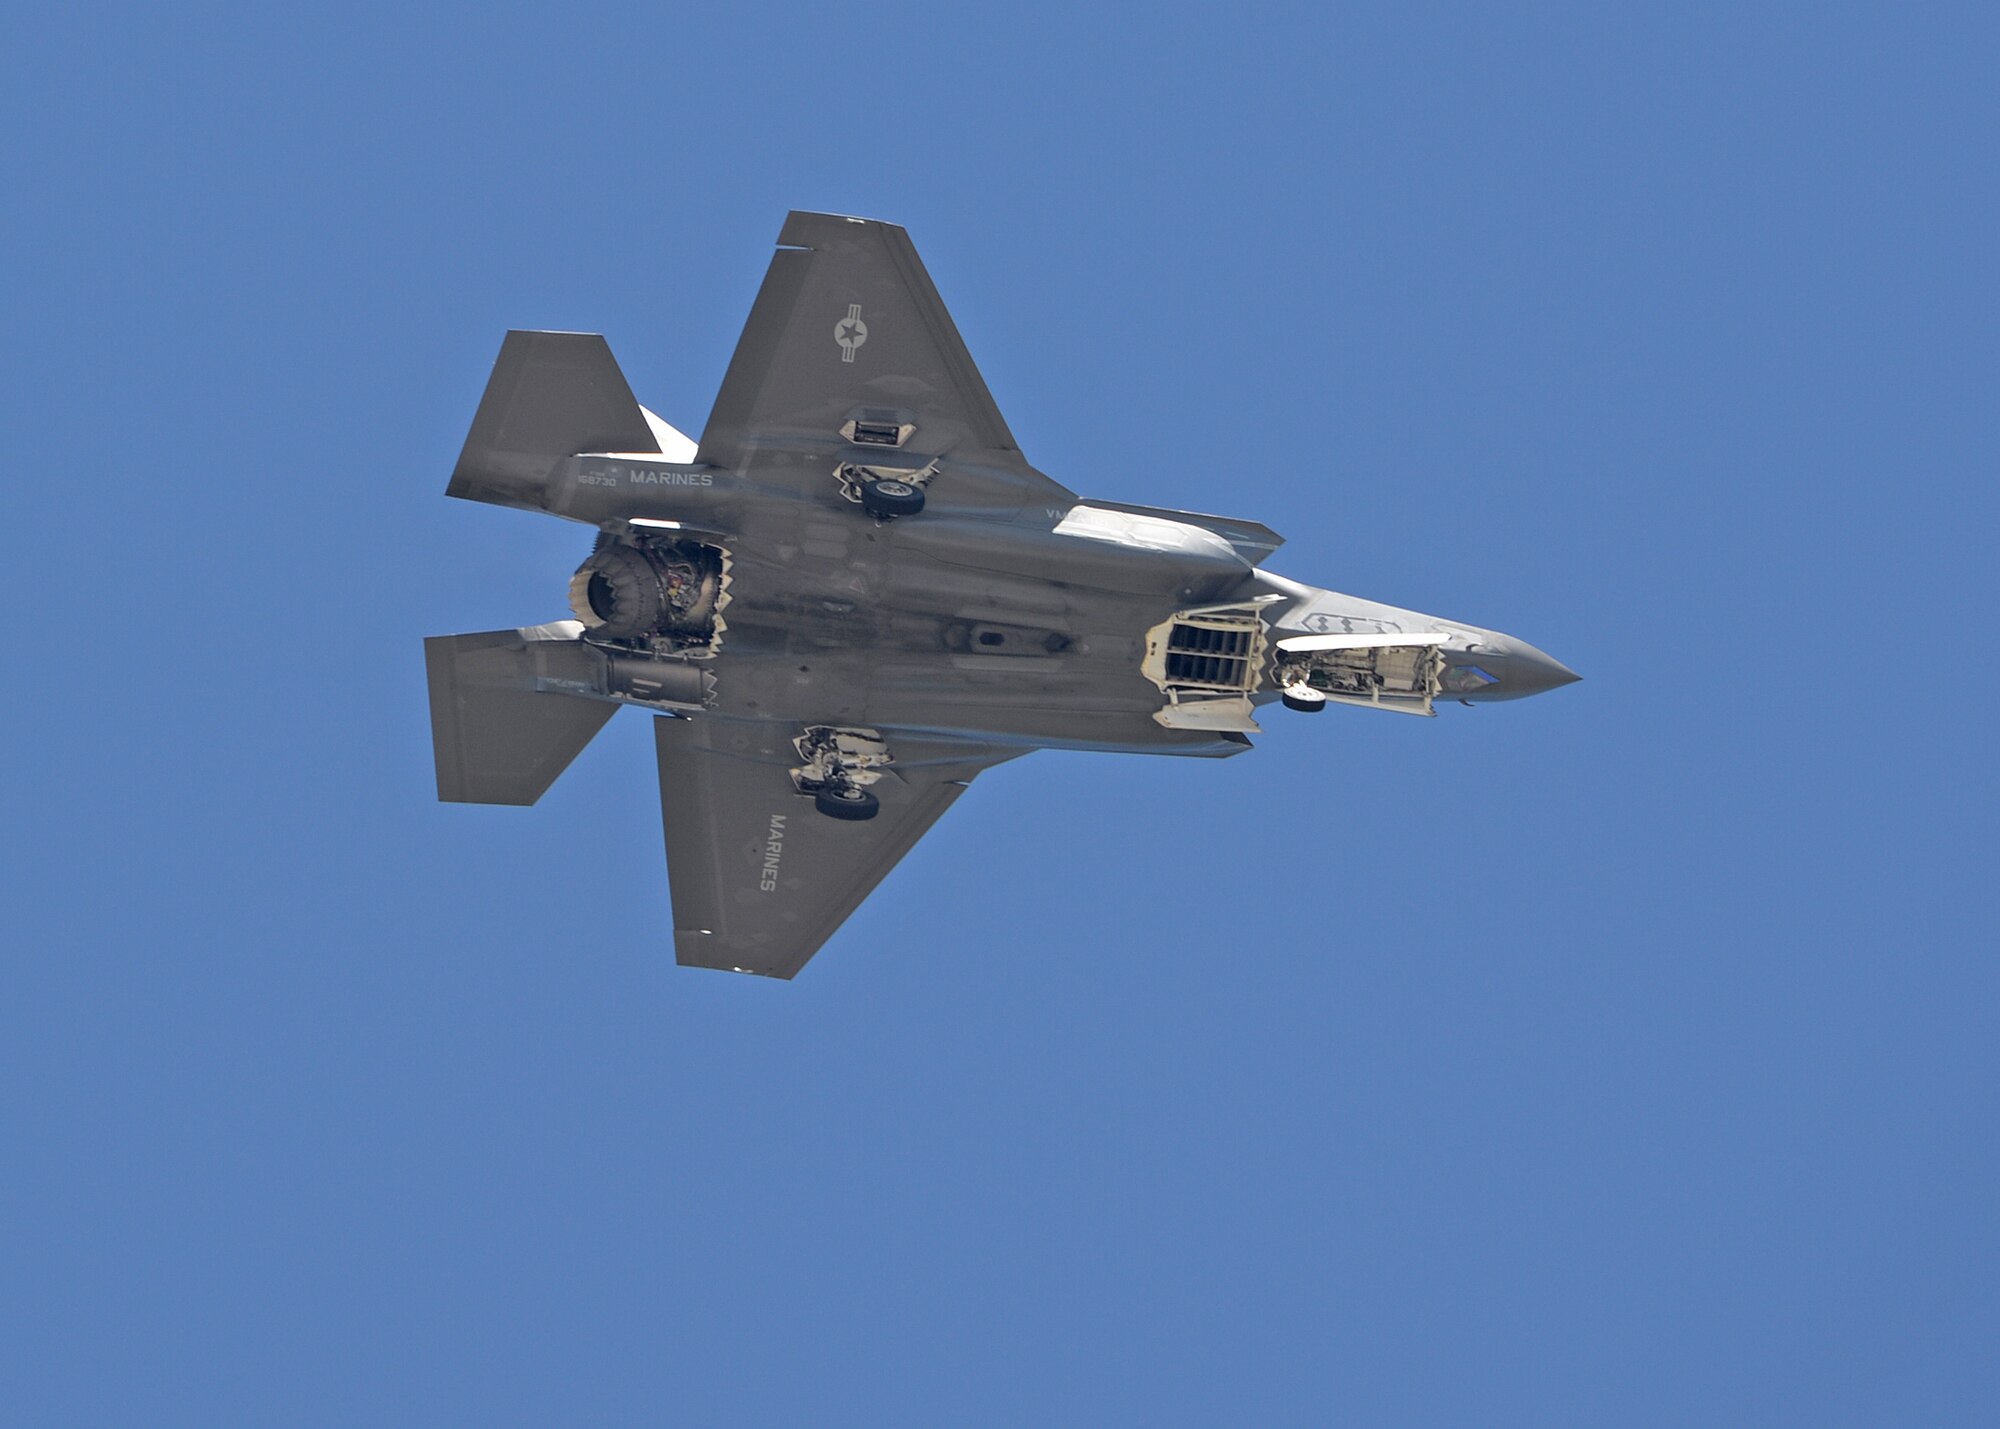 First ever check flight of an USMC F-35B STOVL Joint Strike Fighter aircraft at Hill AFB, Utah June 18. The aircraft was undergoing a functional check flight following modifications at the Ogden Air Logistics Complex. (Air Force photo by Alex R. Lloyd)